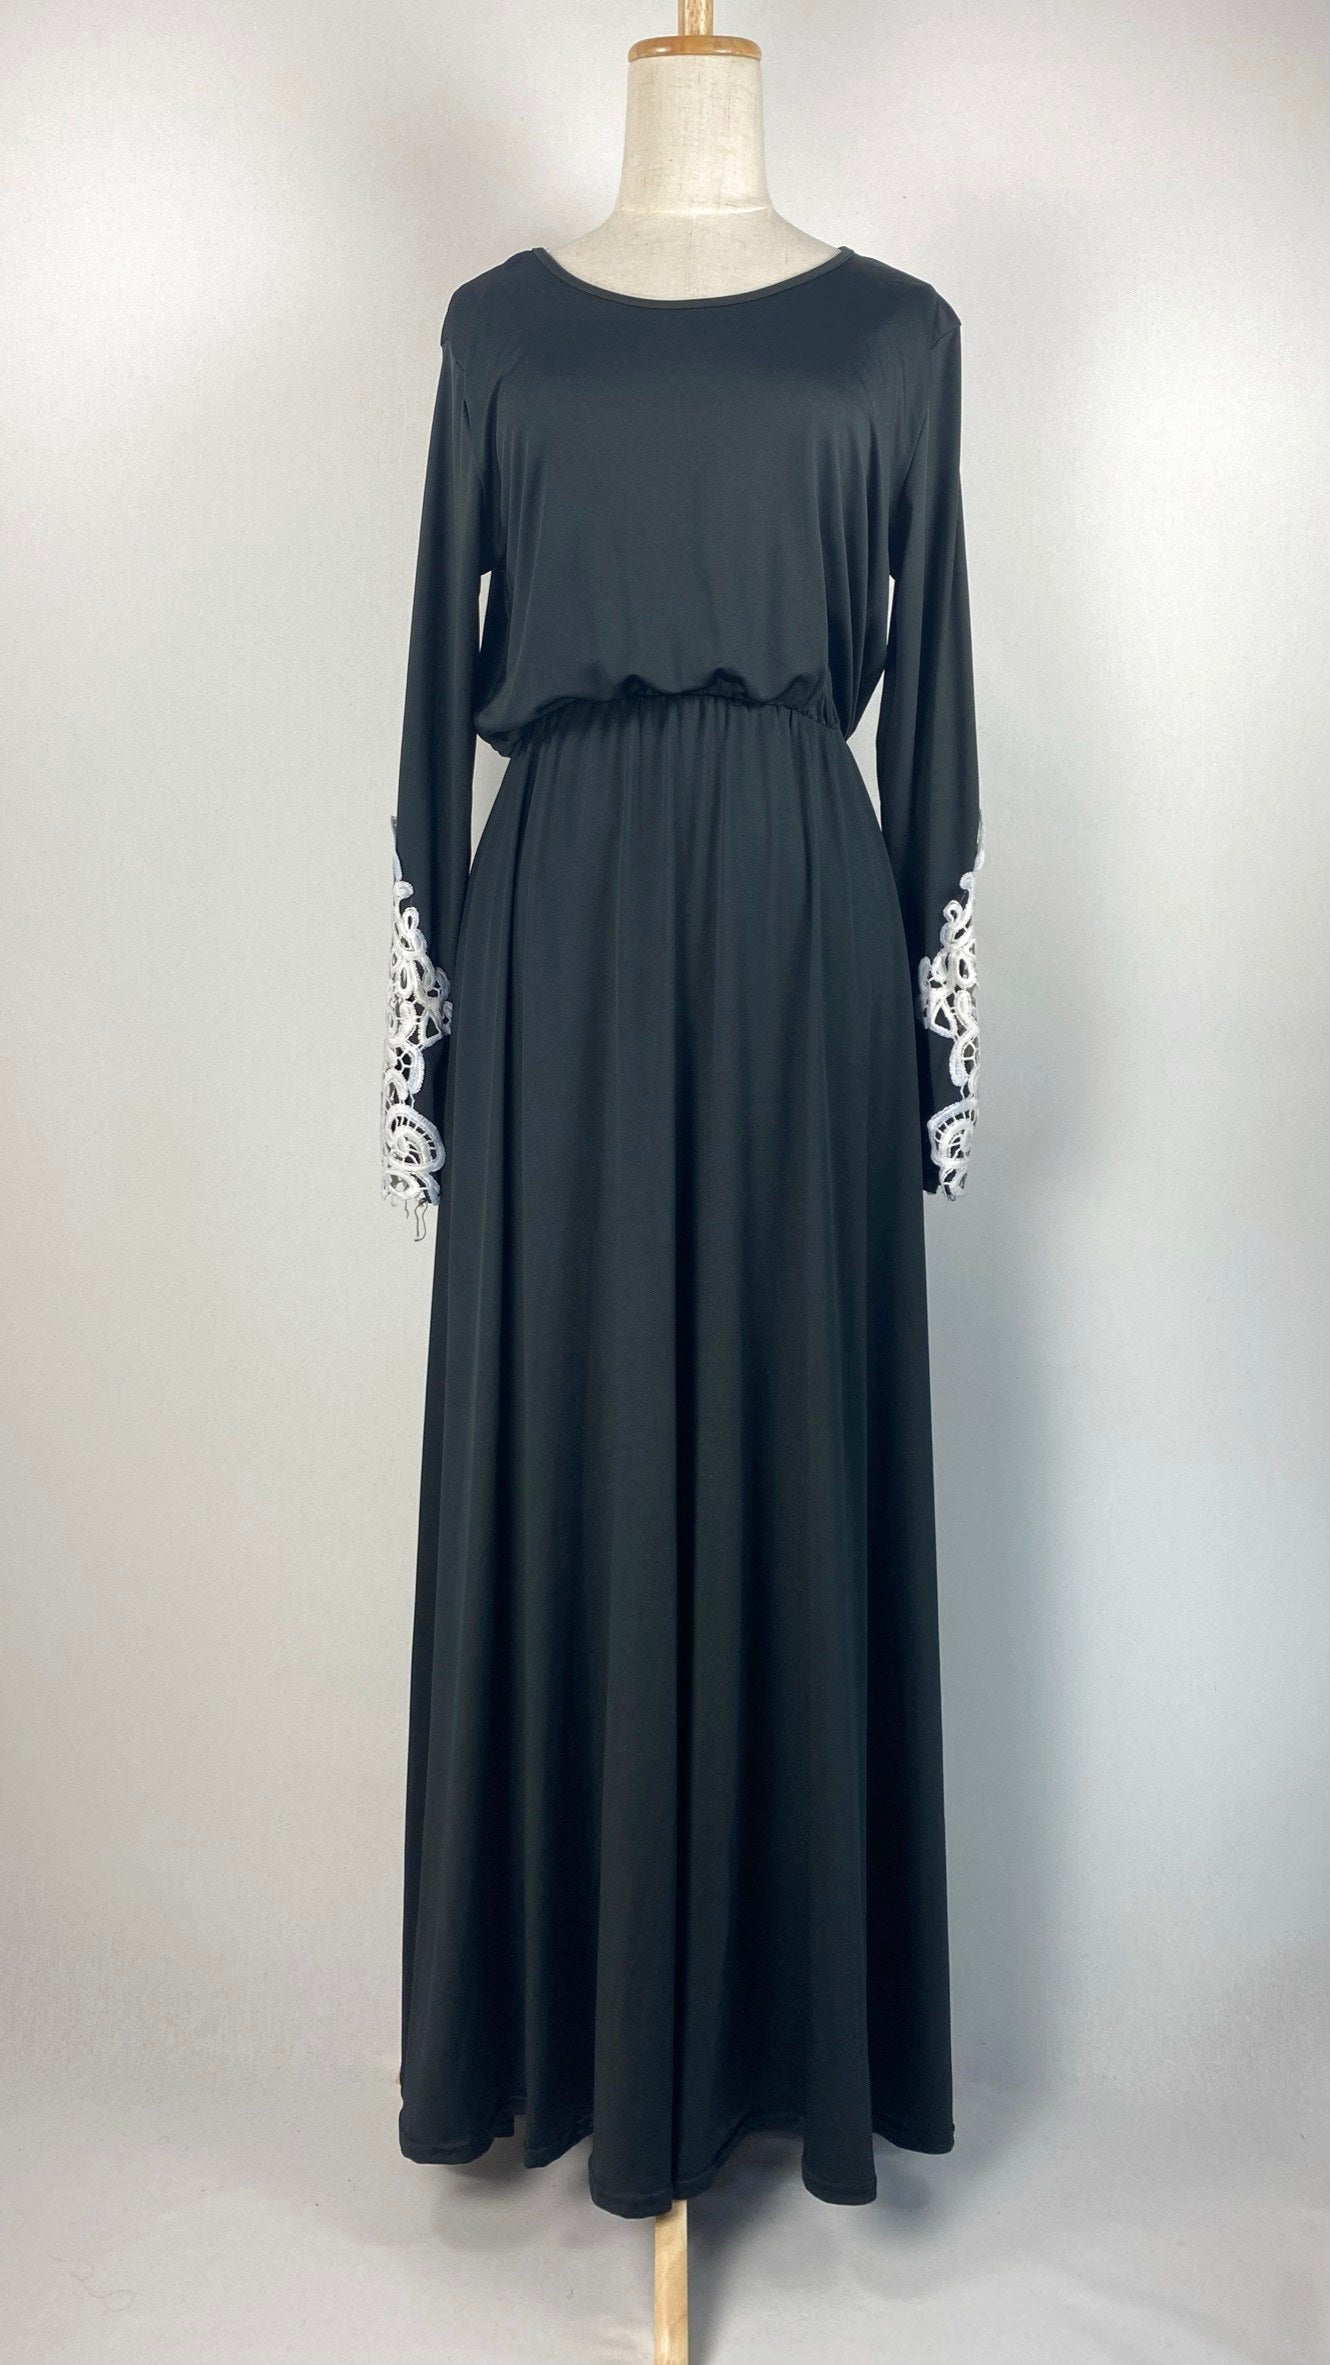 Long Sleeve Maxi Dress with Trim on Sleeves, Black